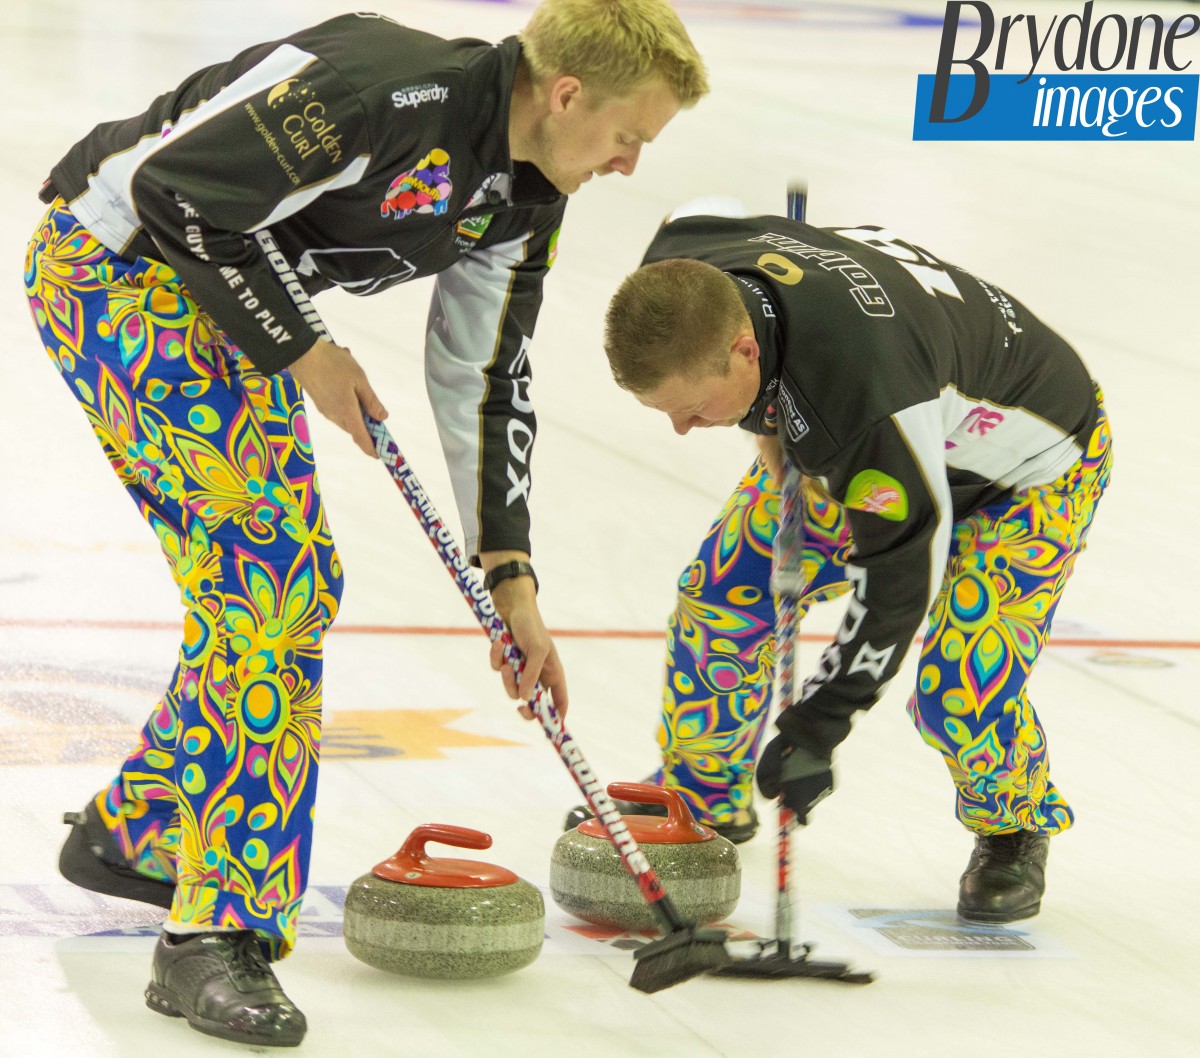 Team Ulsrud from Norway play in Perth Masters - they're always in the fantastic trousers!